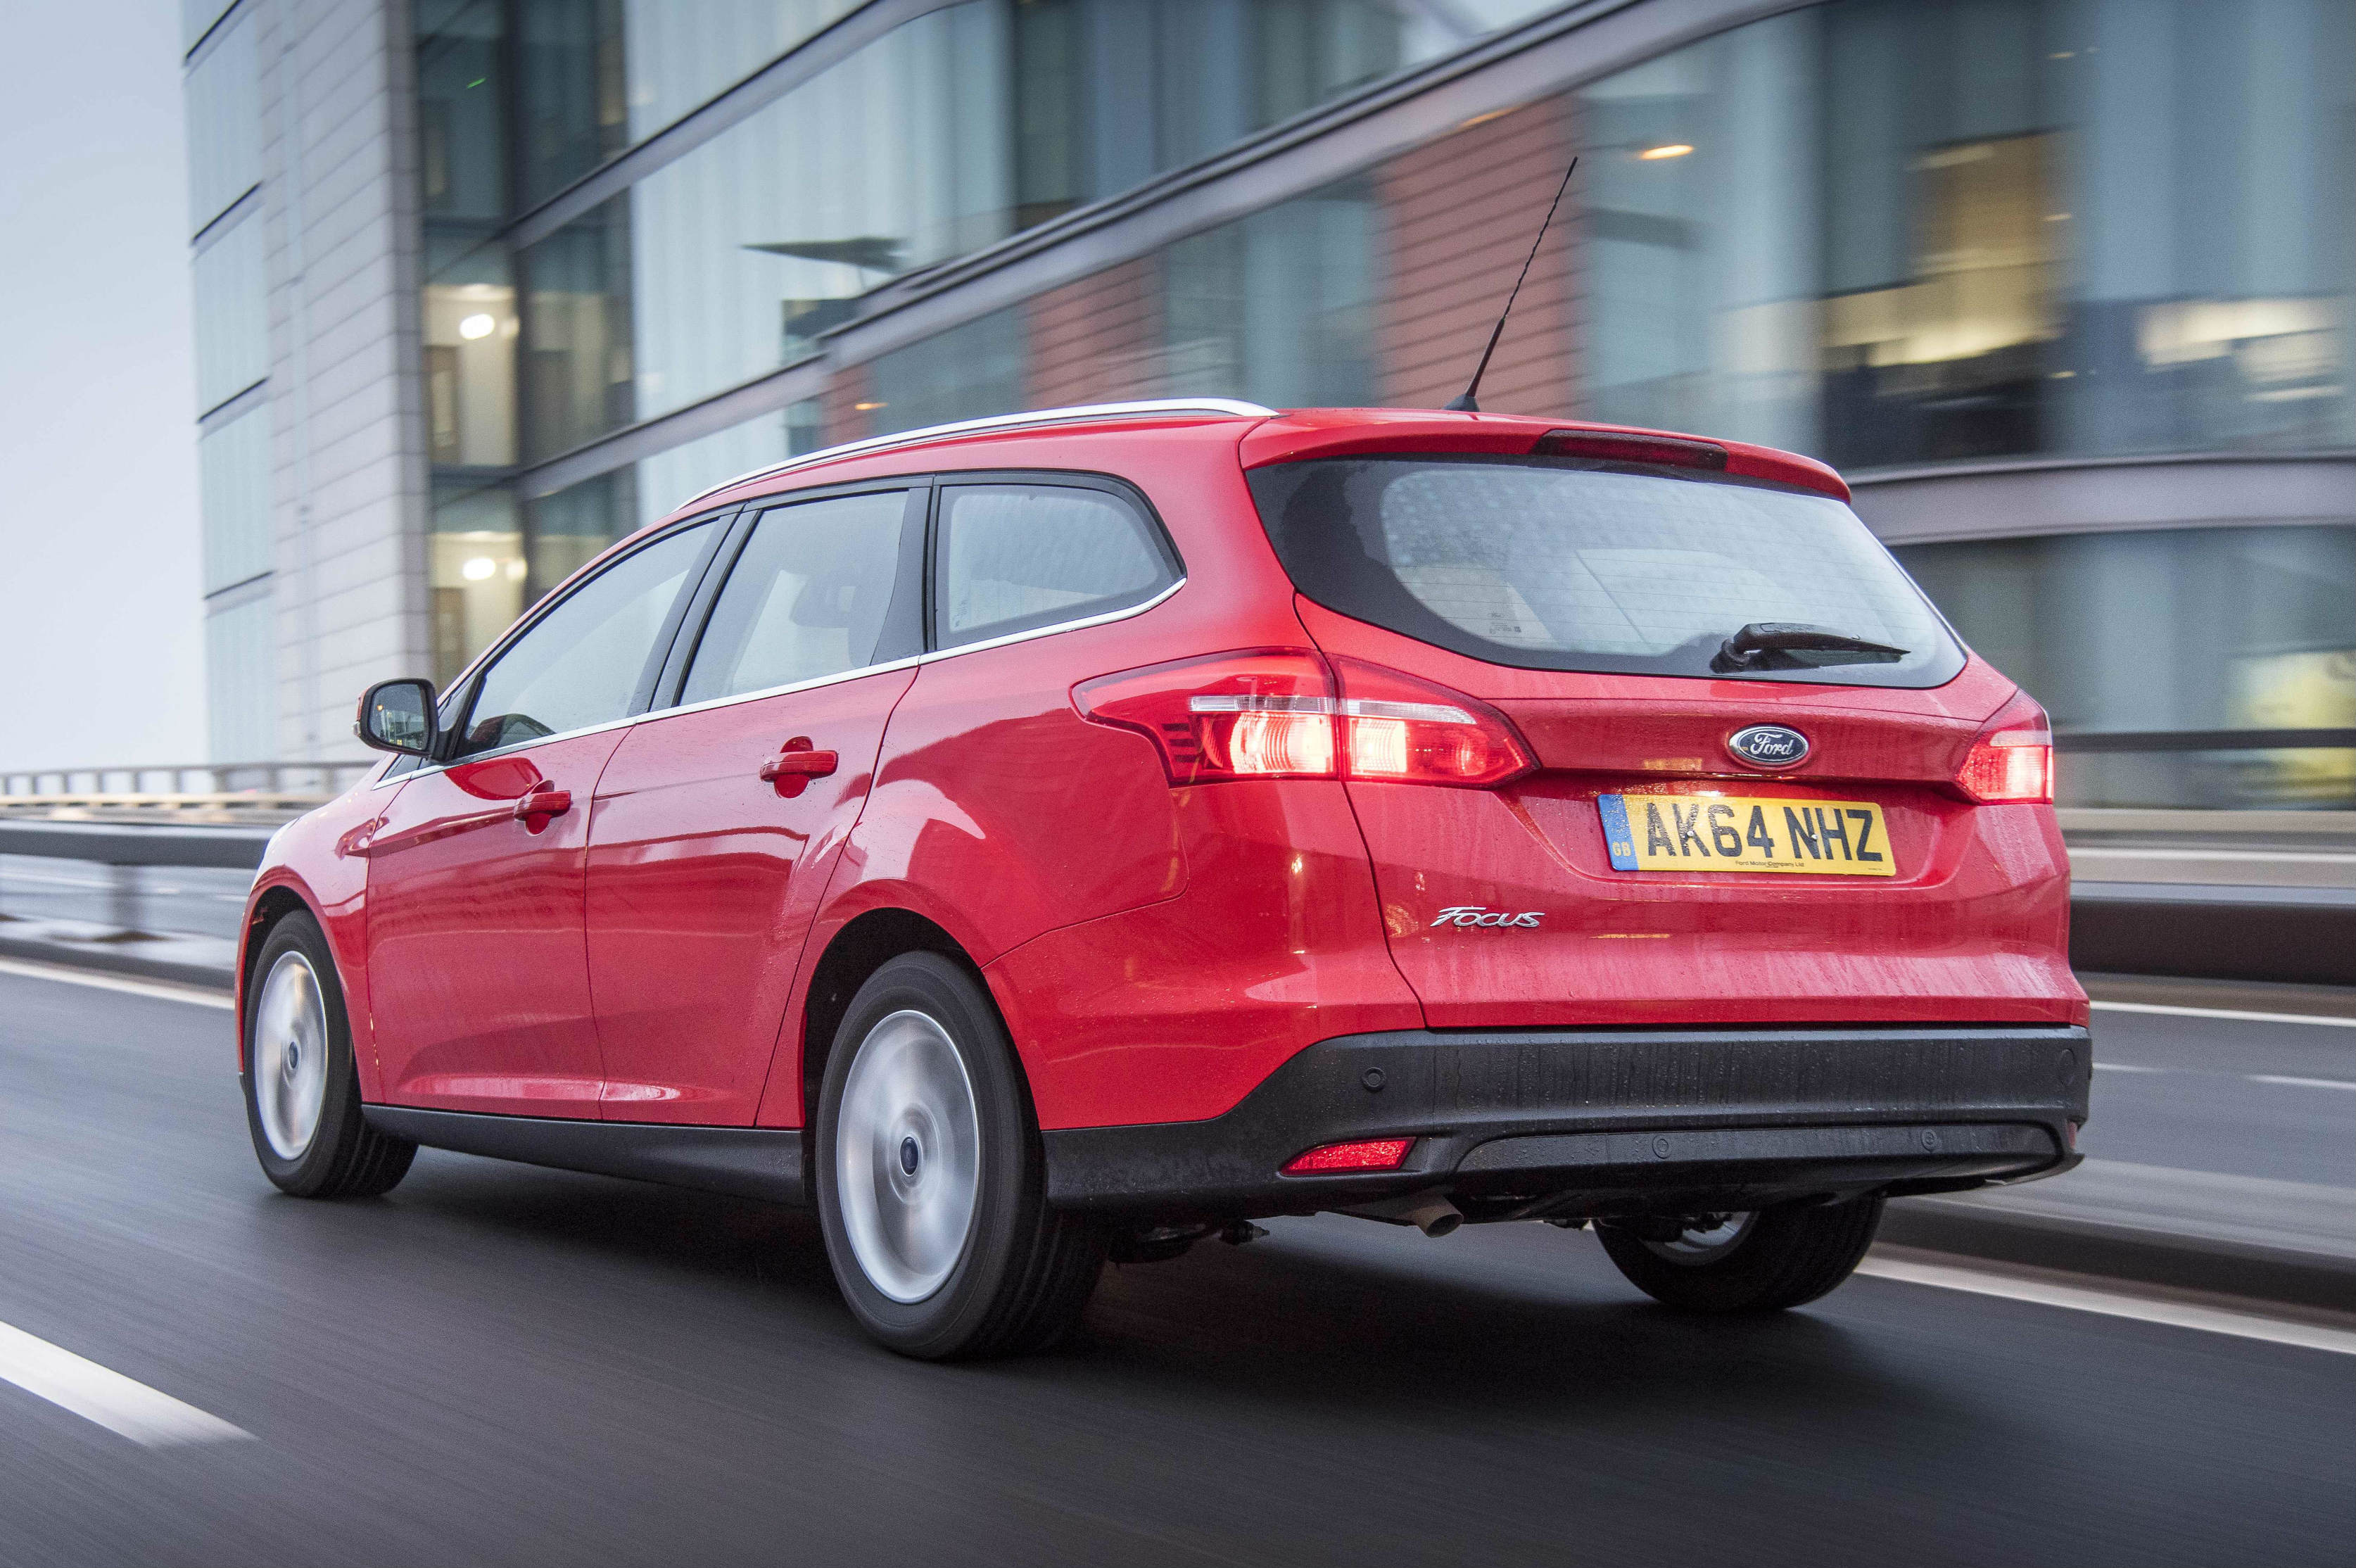 Ford Focus estate: The Sunday Times Top 100 Cars 2016 - Top 5 Mid-size Estates